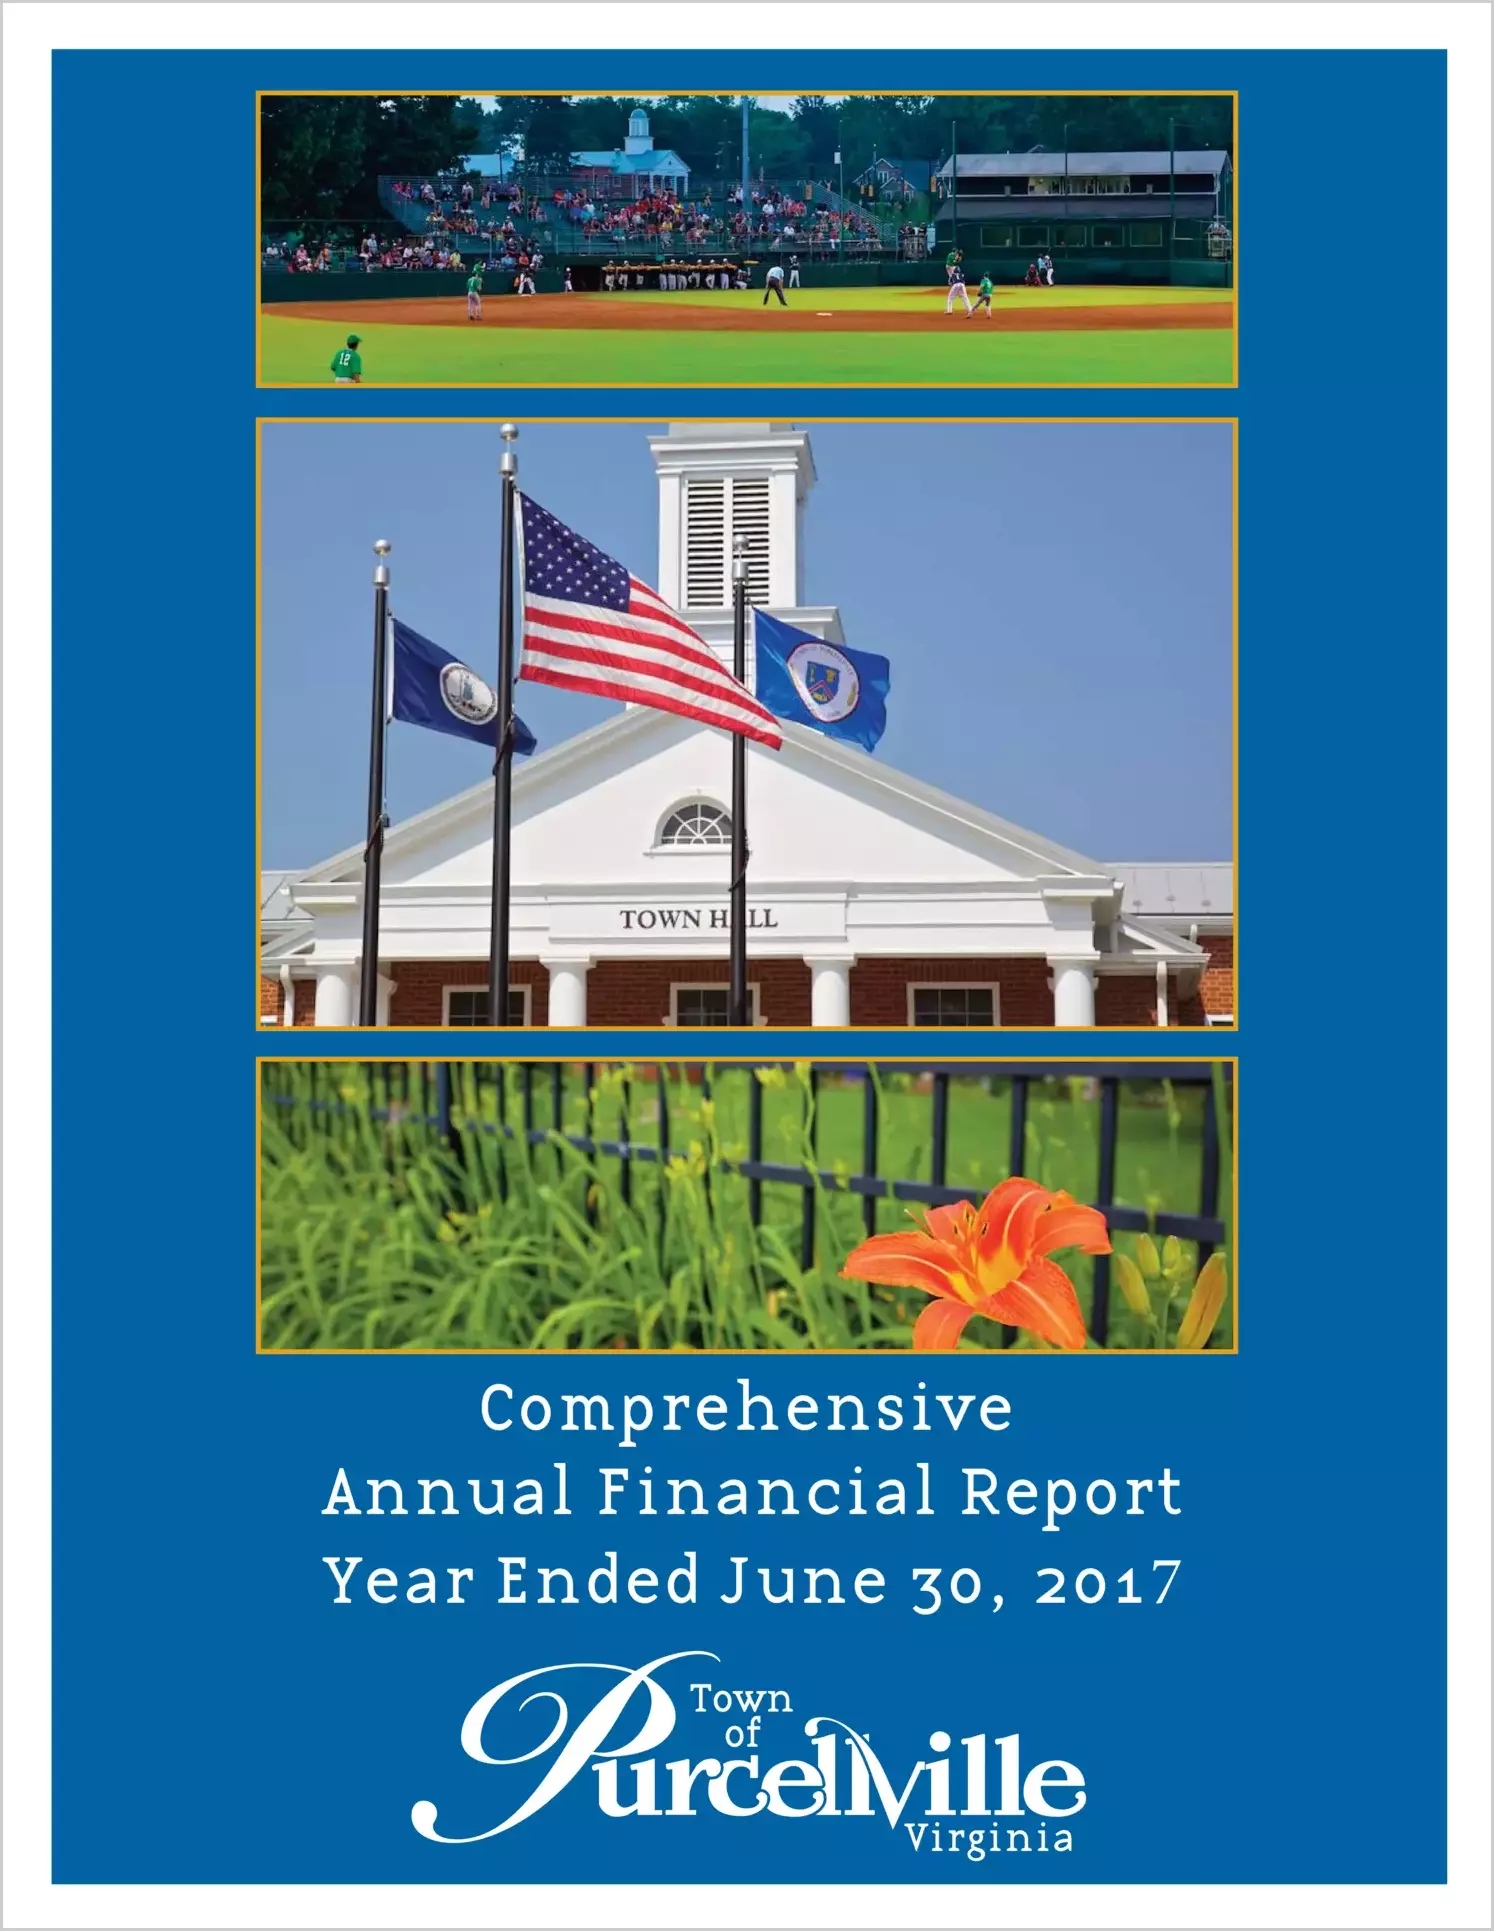 2017 Annual Financial Report for Town of Purcellville